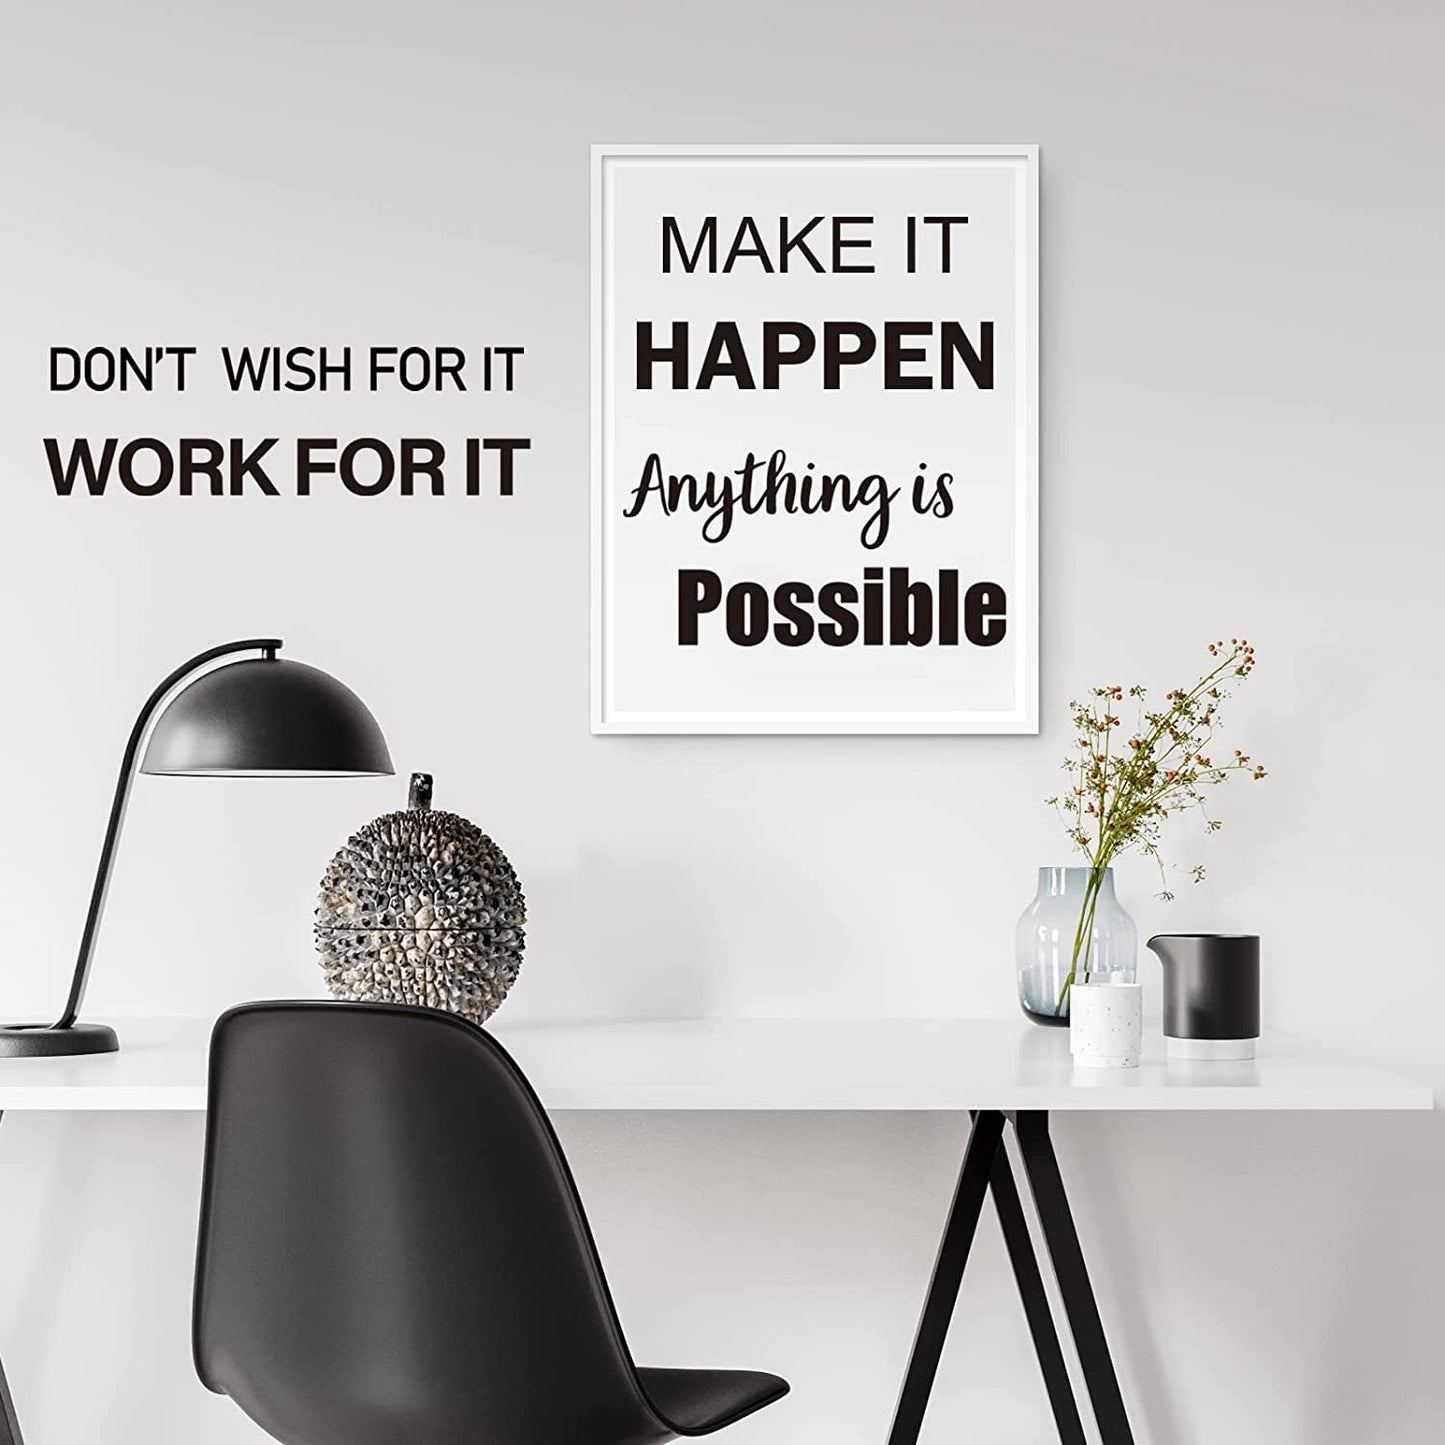 Inspirational Wall Decals Quotes, Motivational Affirmation Wall Stickers, Vinyl Wall Quotes Stickers, Peel & Stick Positive Sayings for Bedroom/Living Room/Bathroom/Office Wall Décor